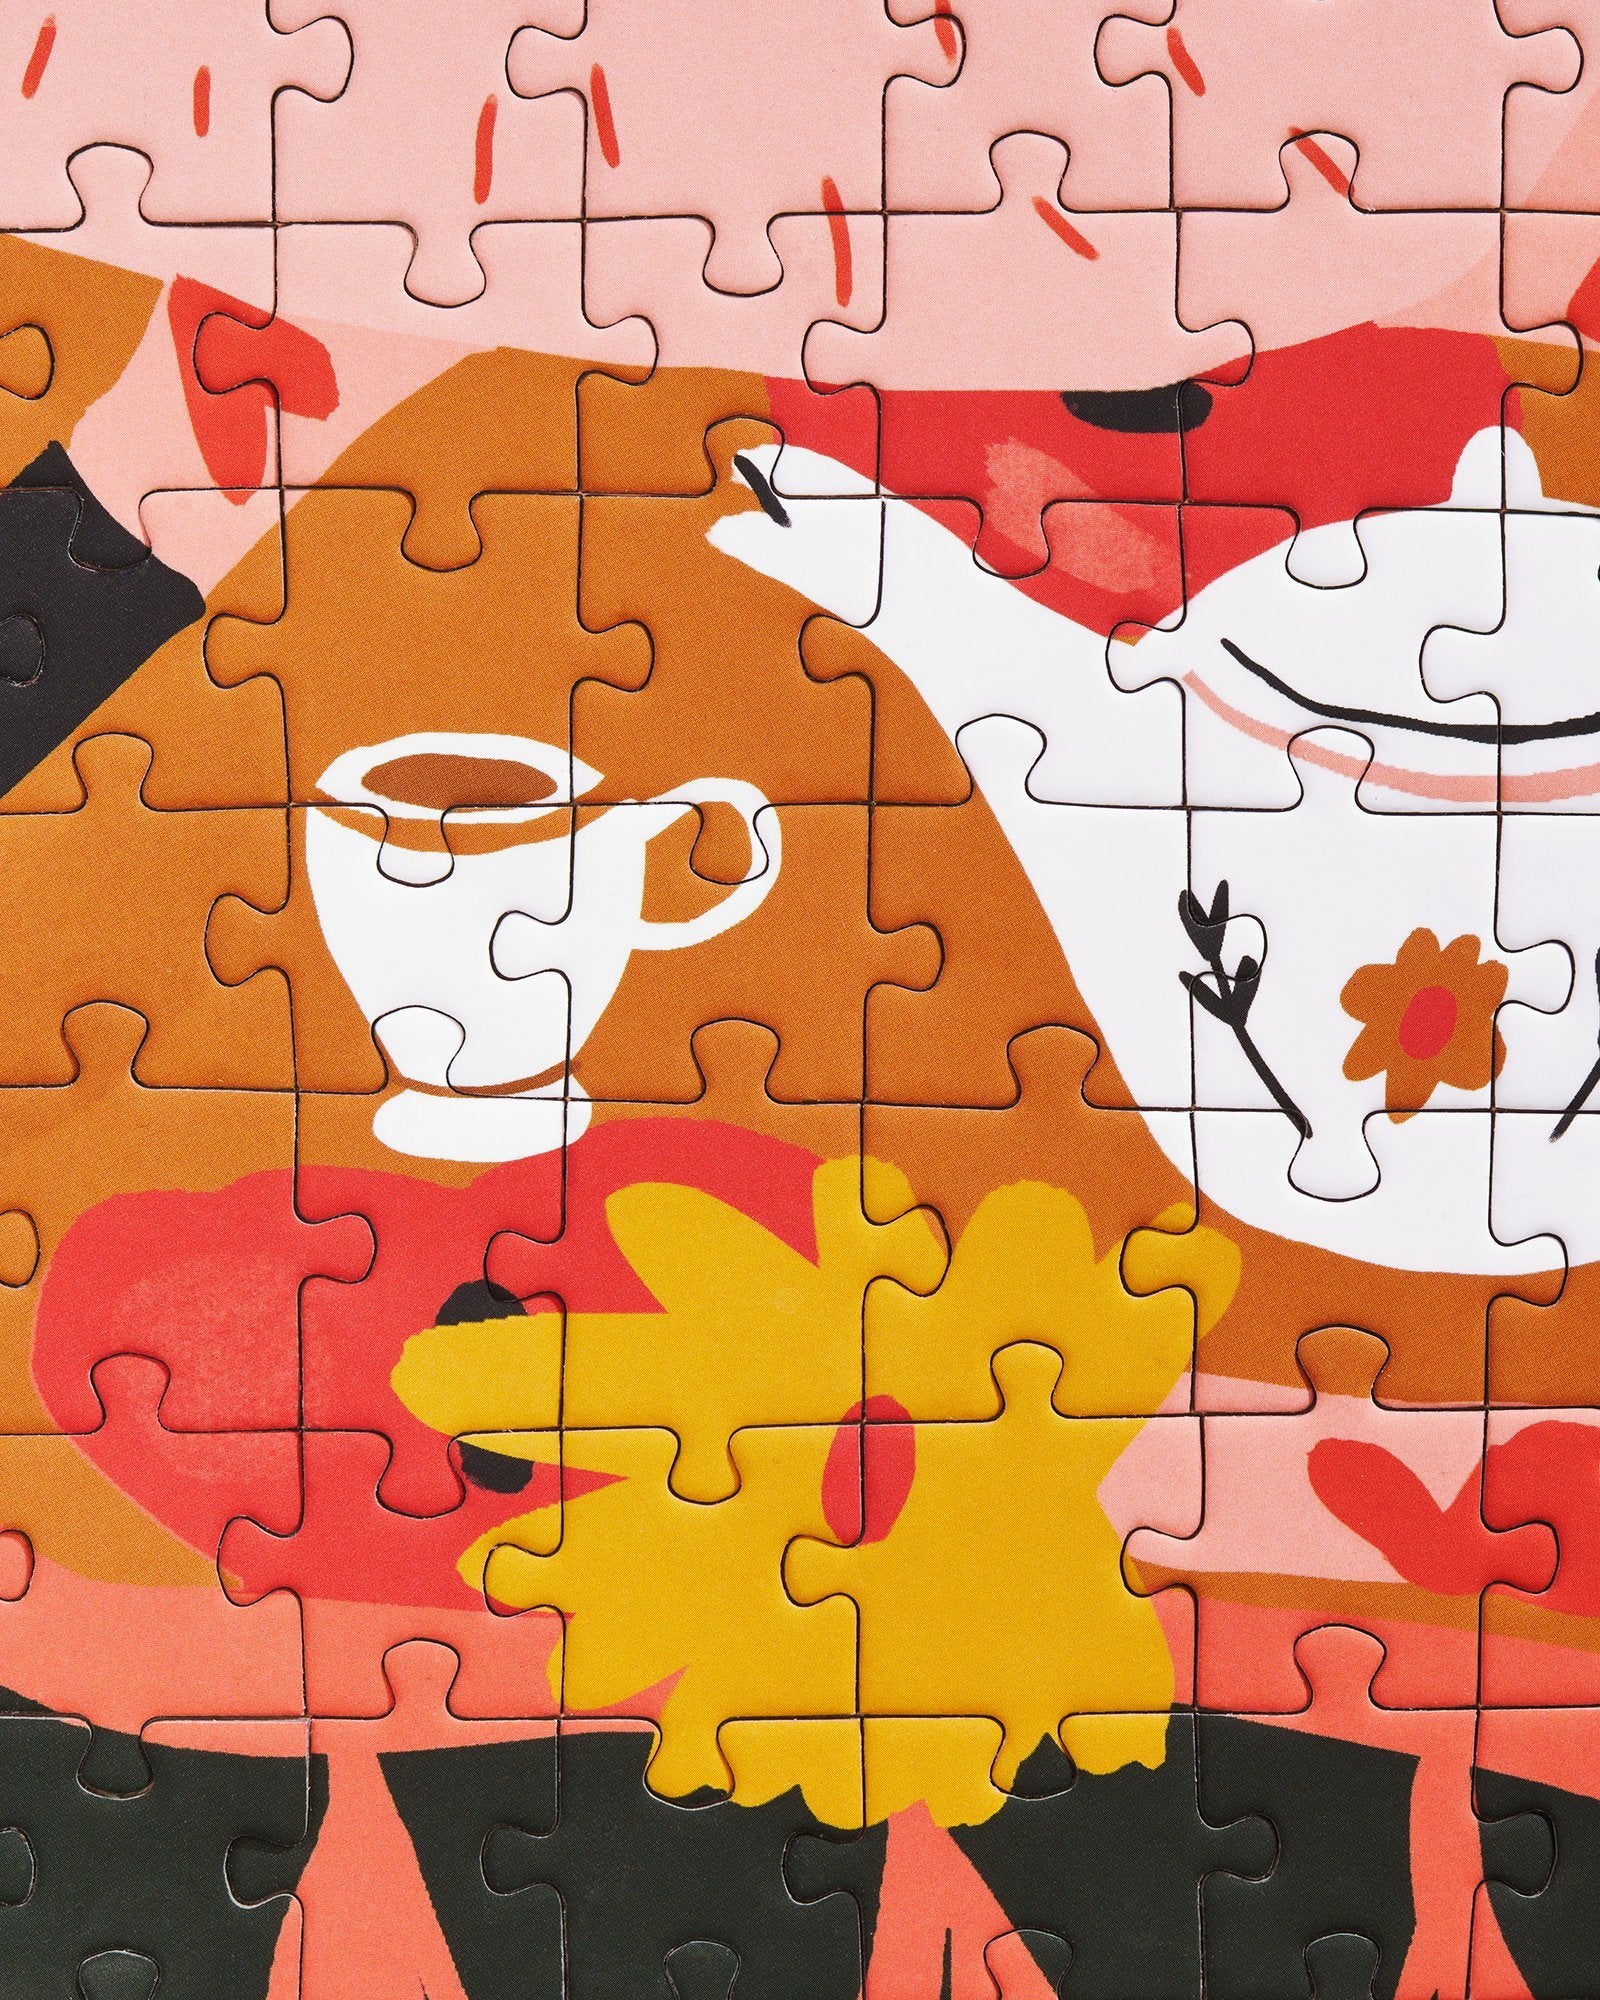 Secret Jungle Tea Party Puzzle by Holly Jolley - Ordinary Habit